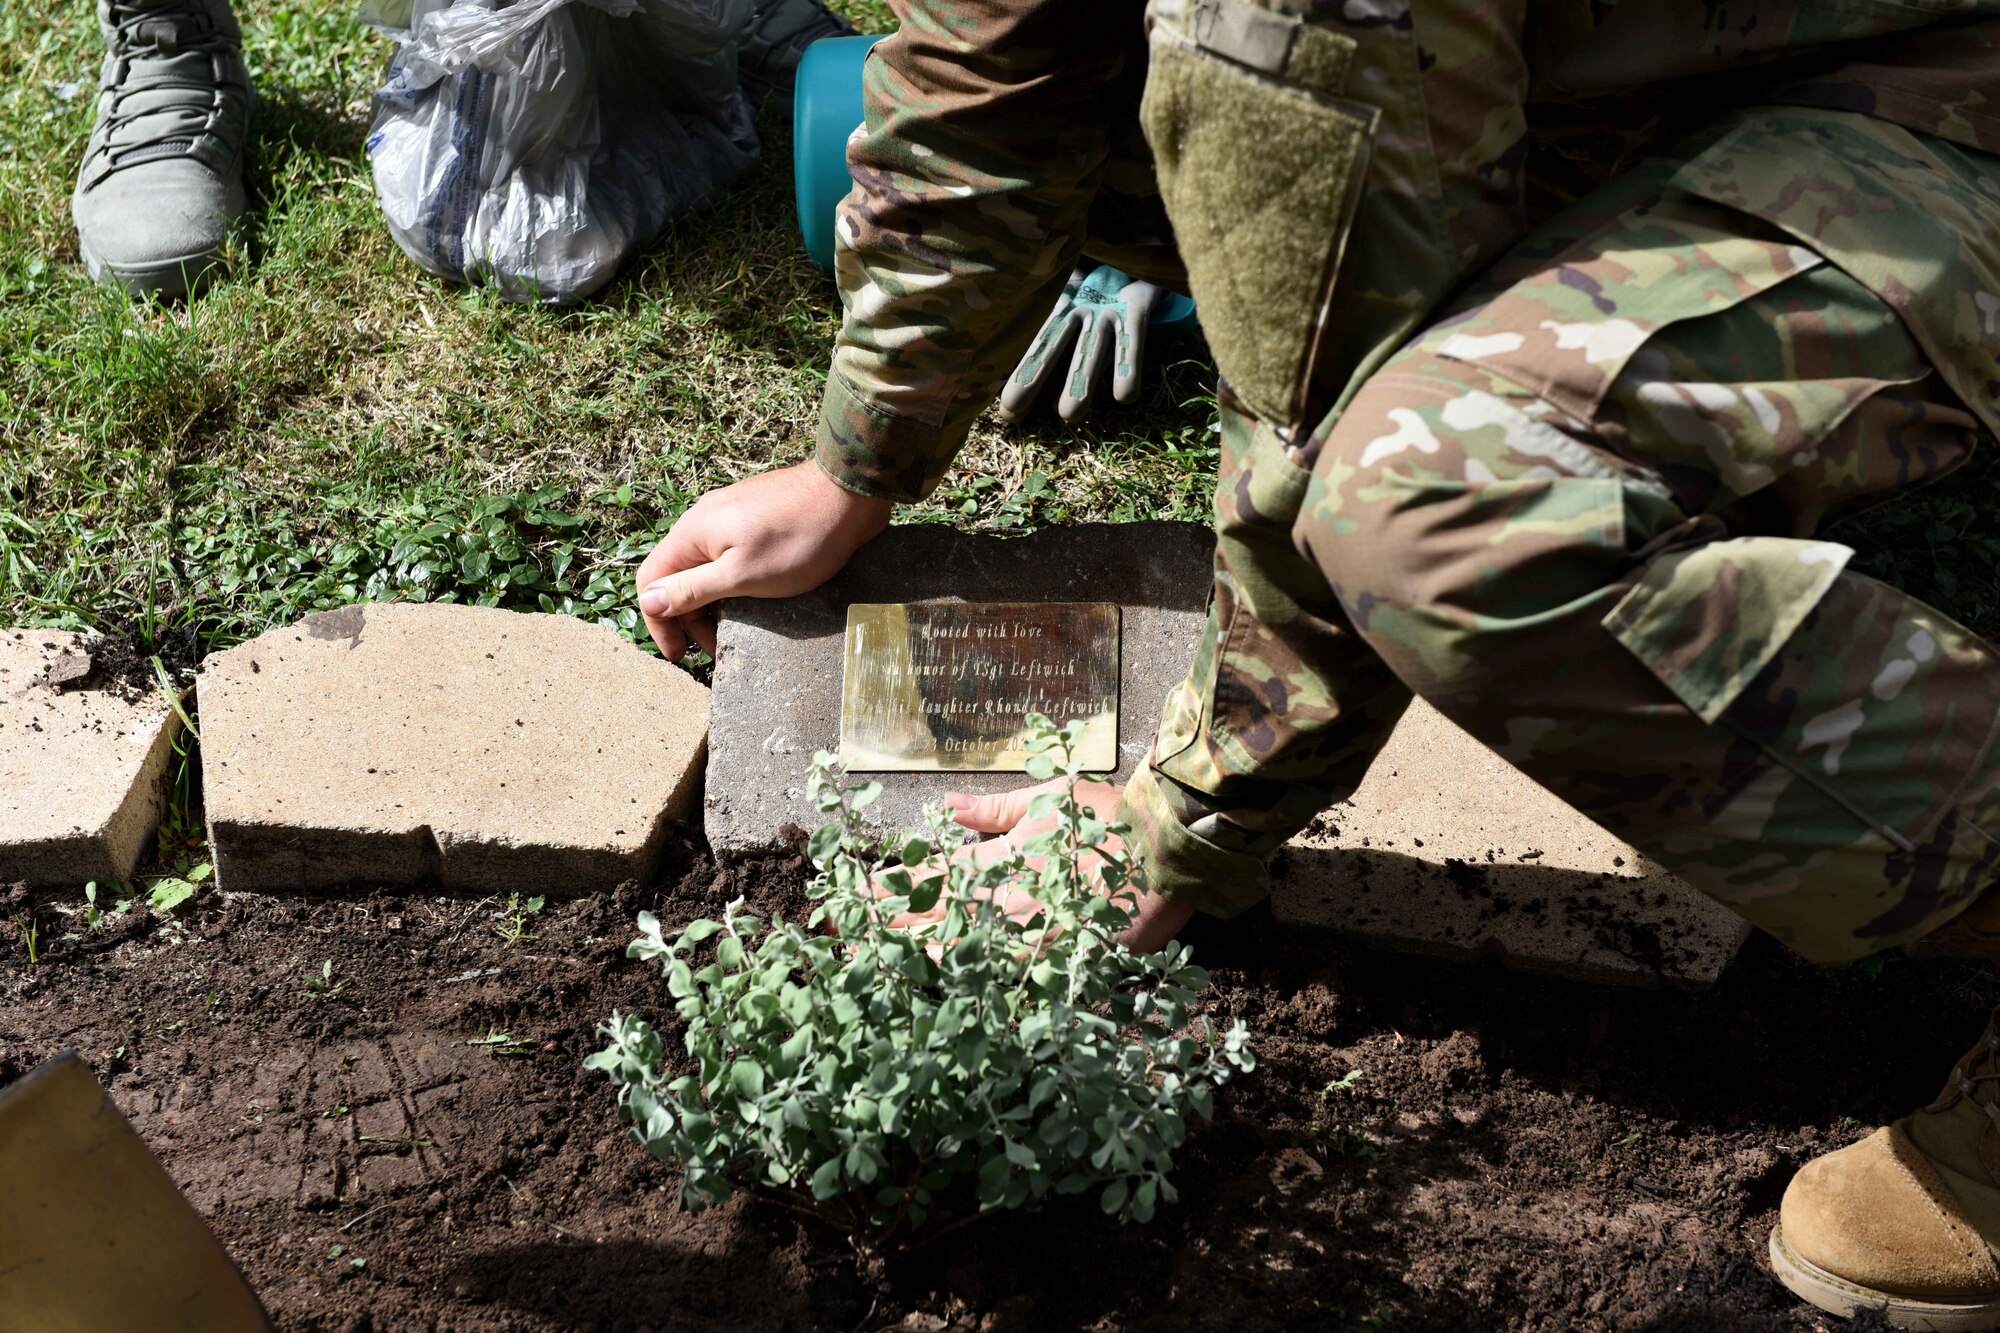 U.S. Air Force Staff Sgt. Dillon Duermyer, 17th Medical Support Squadron medical records NCO in charge, lays a memorial plaque near Leftwich Hall on Goodfellow Air Force Base, Texas, Oct. 23, 2018. Goodfellow dedicated a pavilion along the troop walk as a second memorial to Tech. Sgt. Raymond Leftwich. (U.S. Air Force photo by Senior Airman Randall Moose/Released)